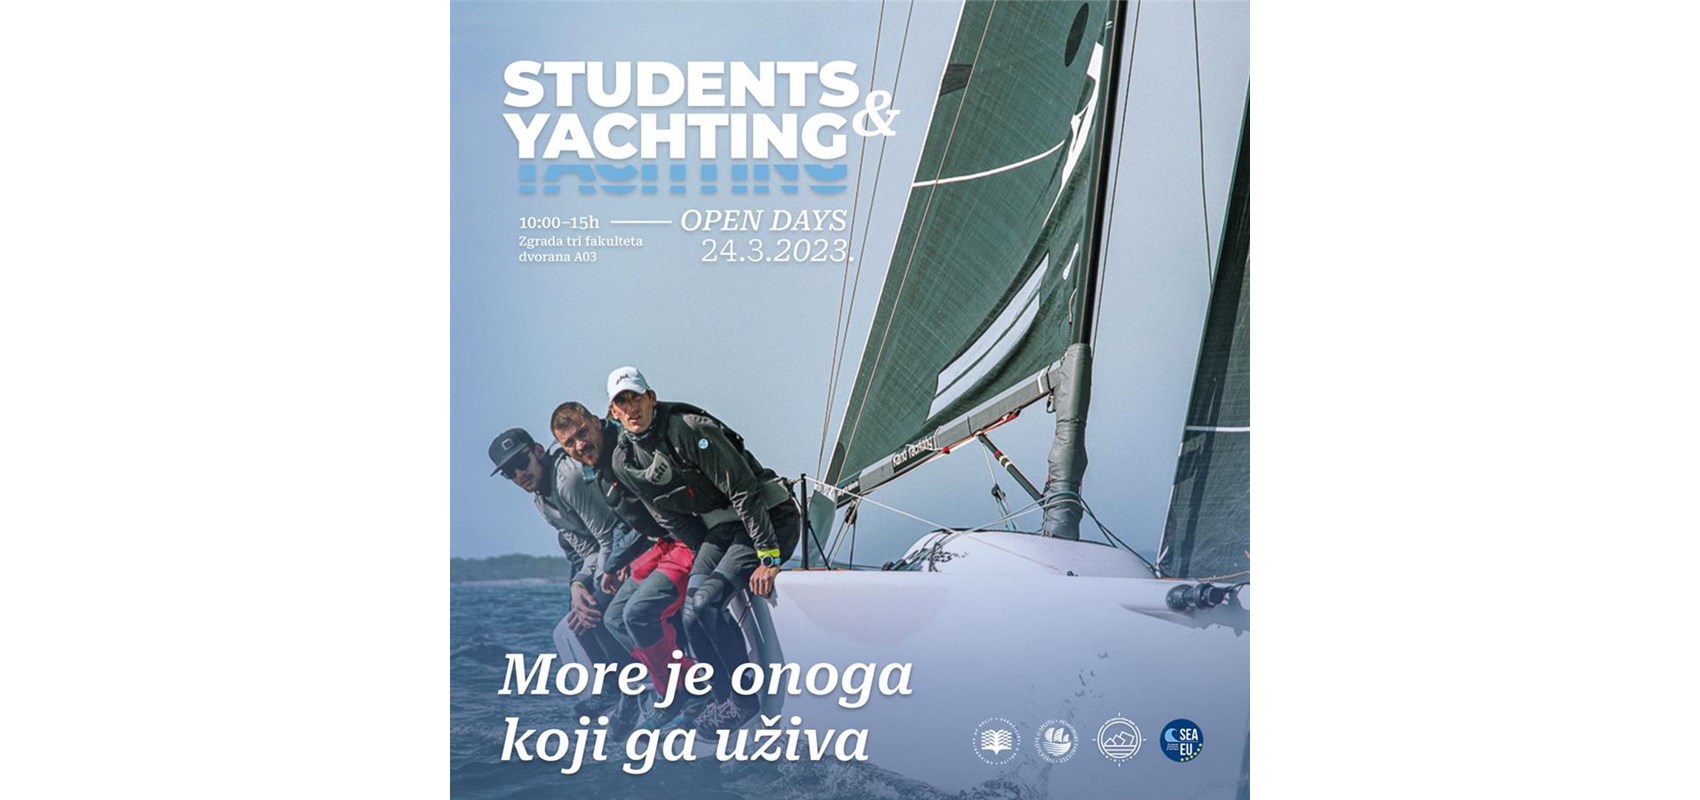 Poziv studentima: Students and Yachting Open Days